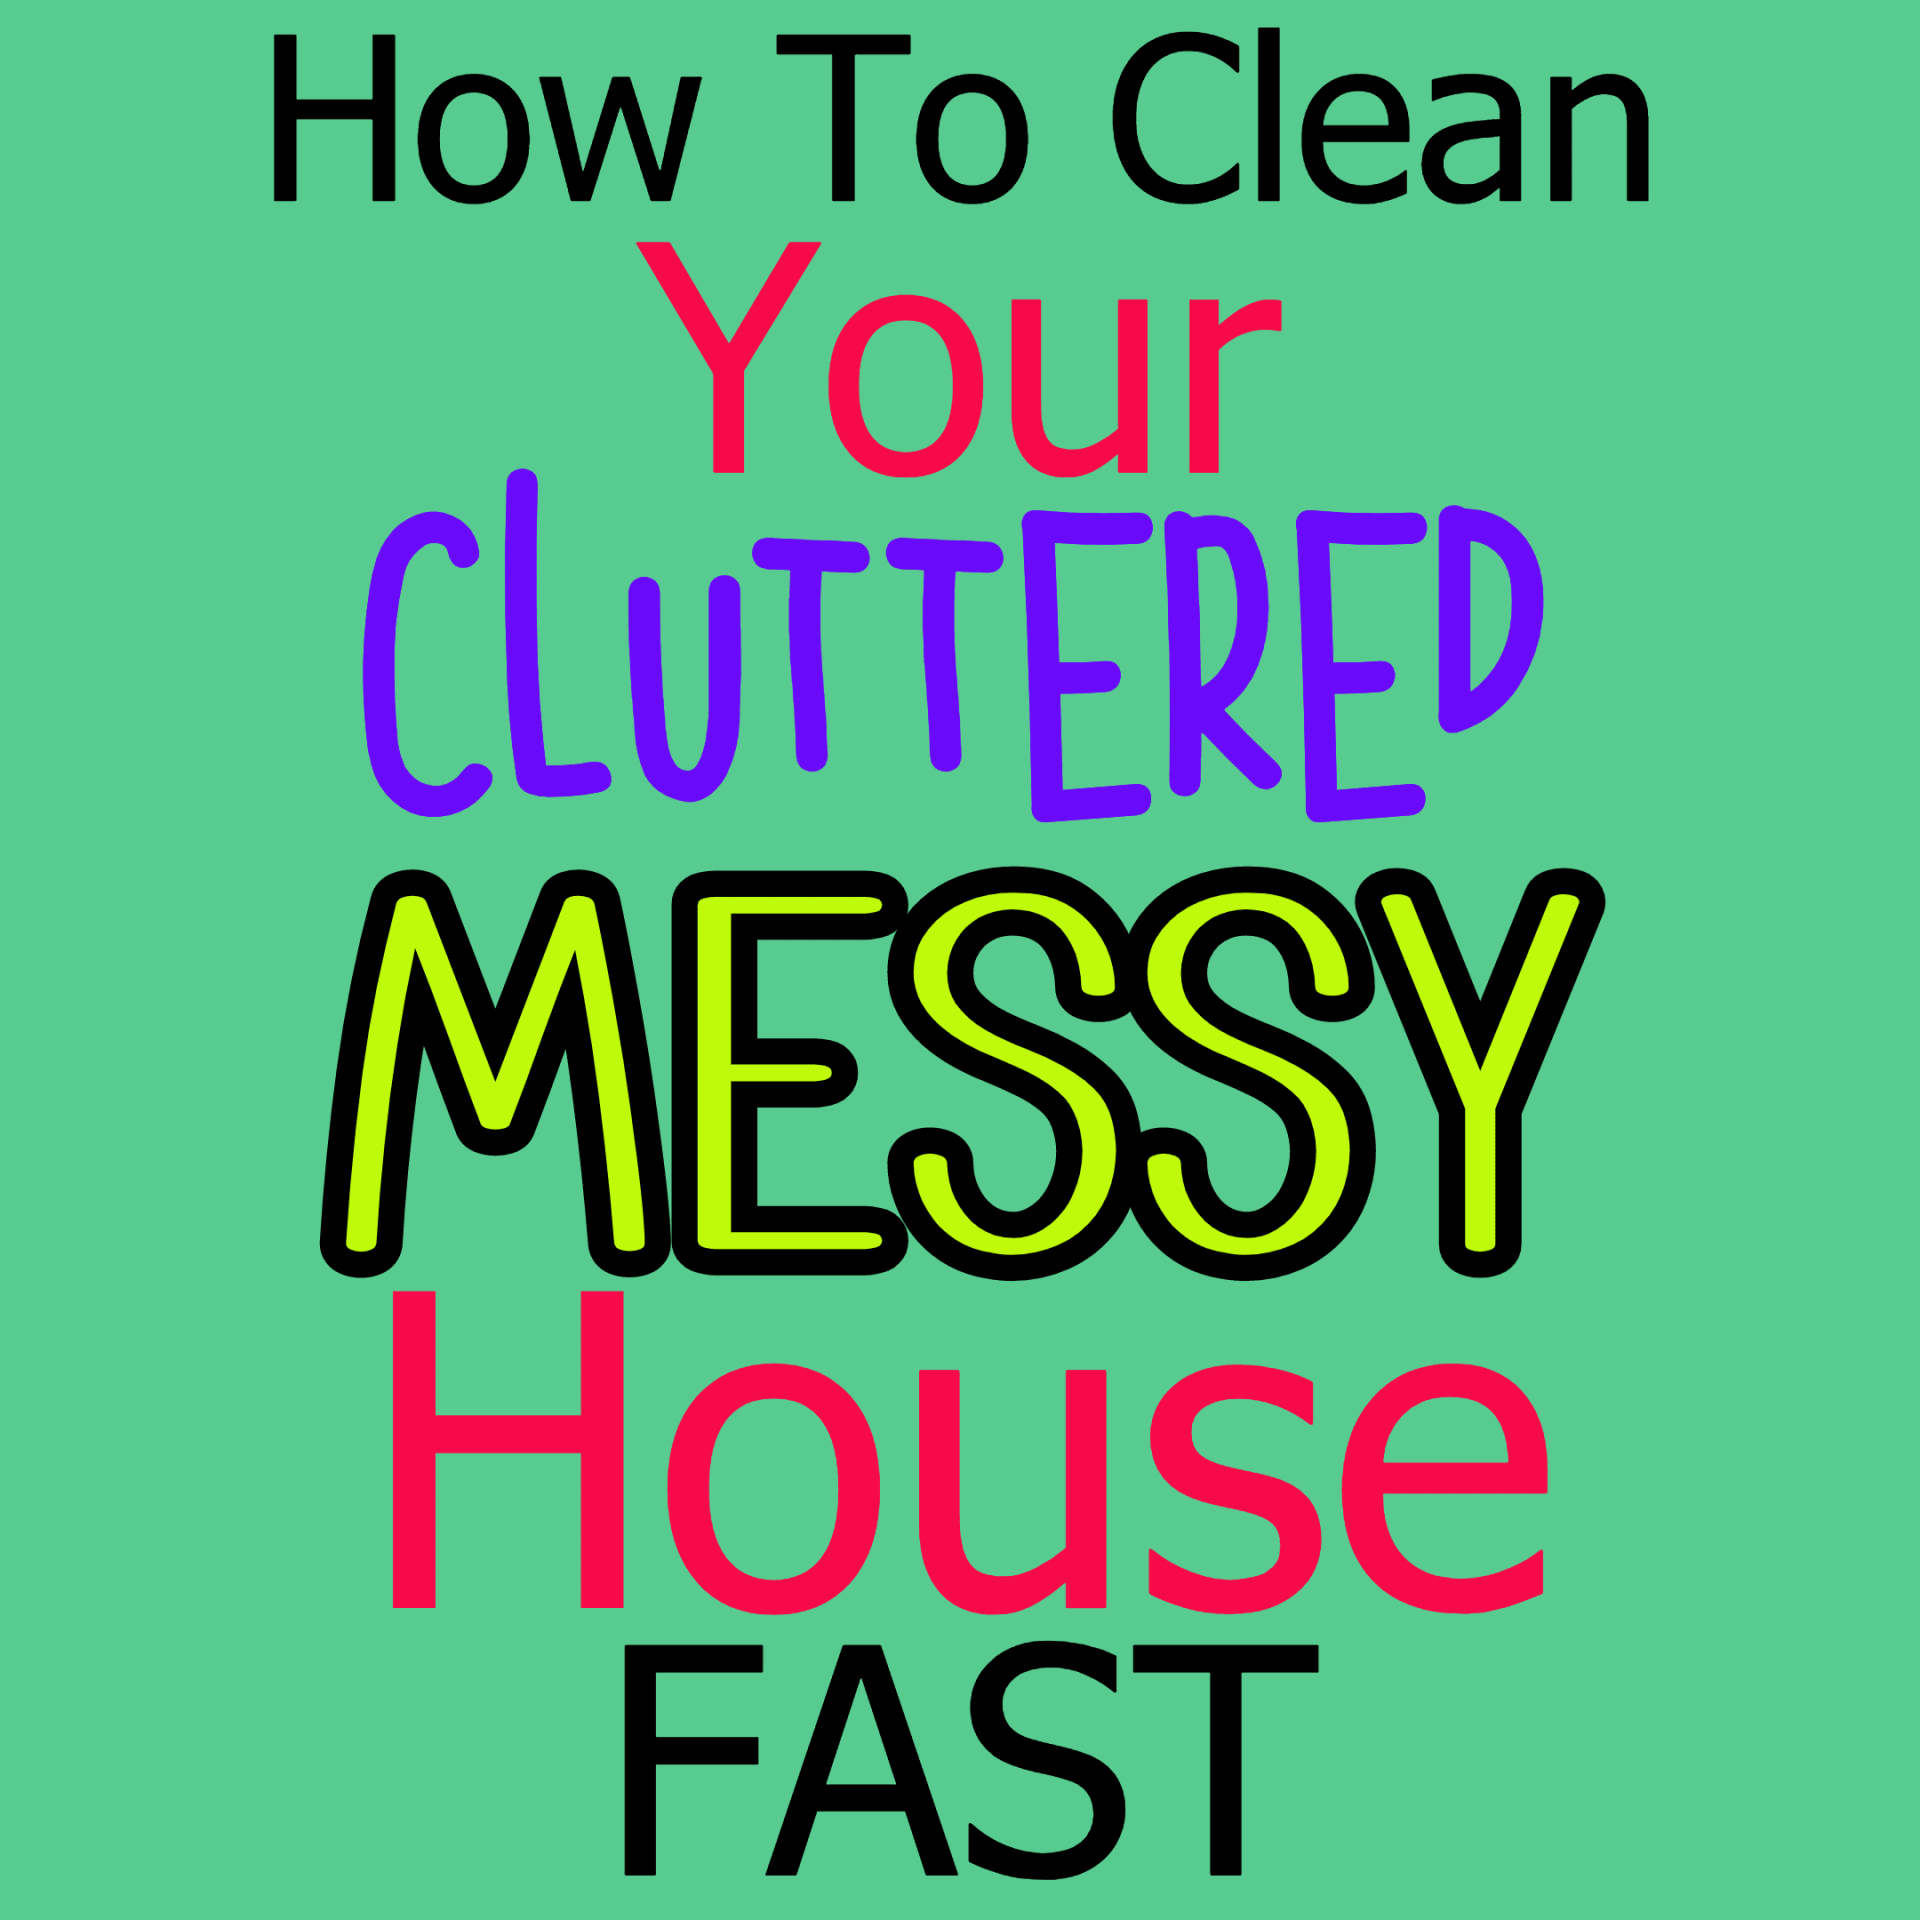 Uncluttering your home - how to clean your cluttered house fast